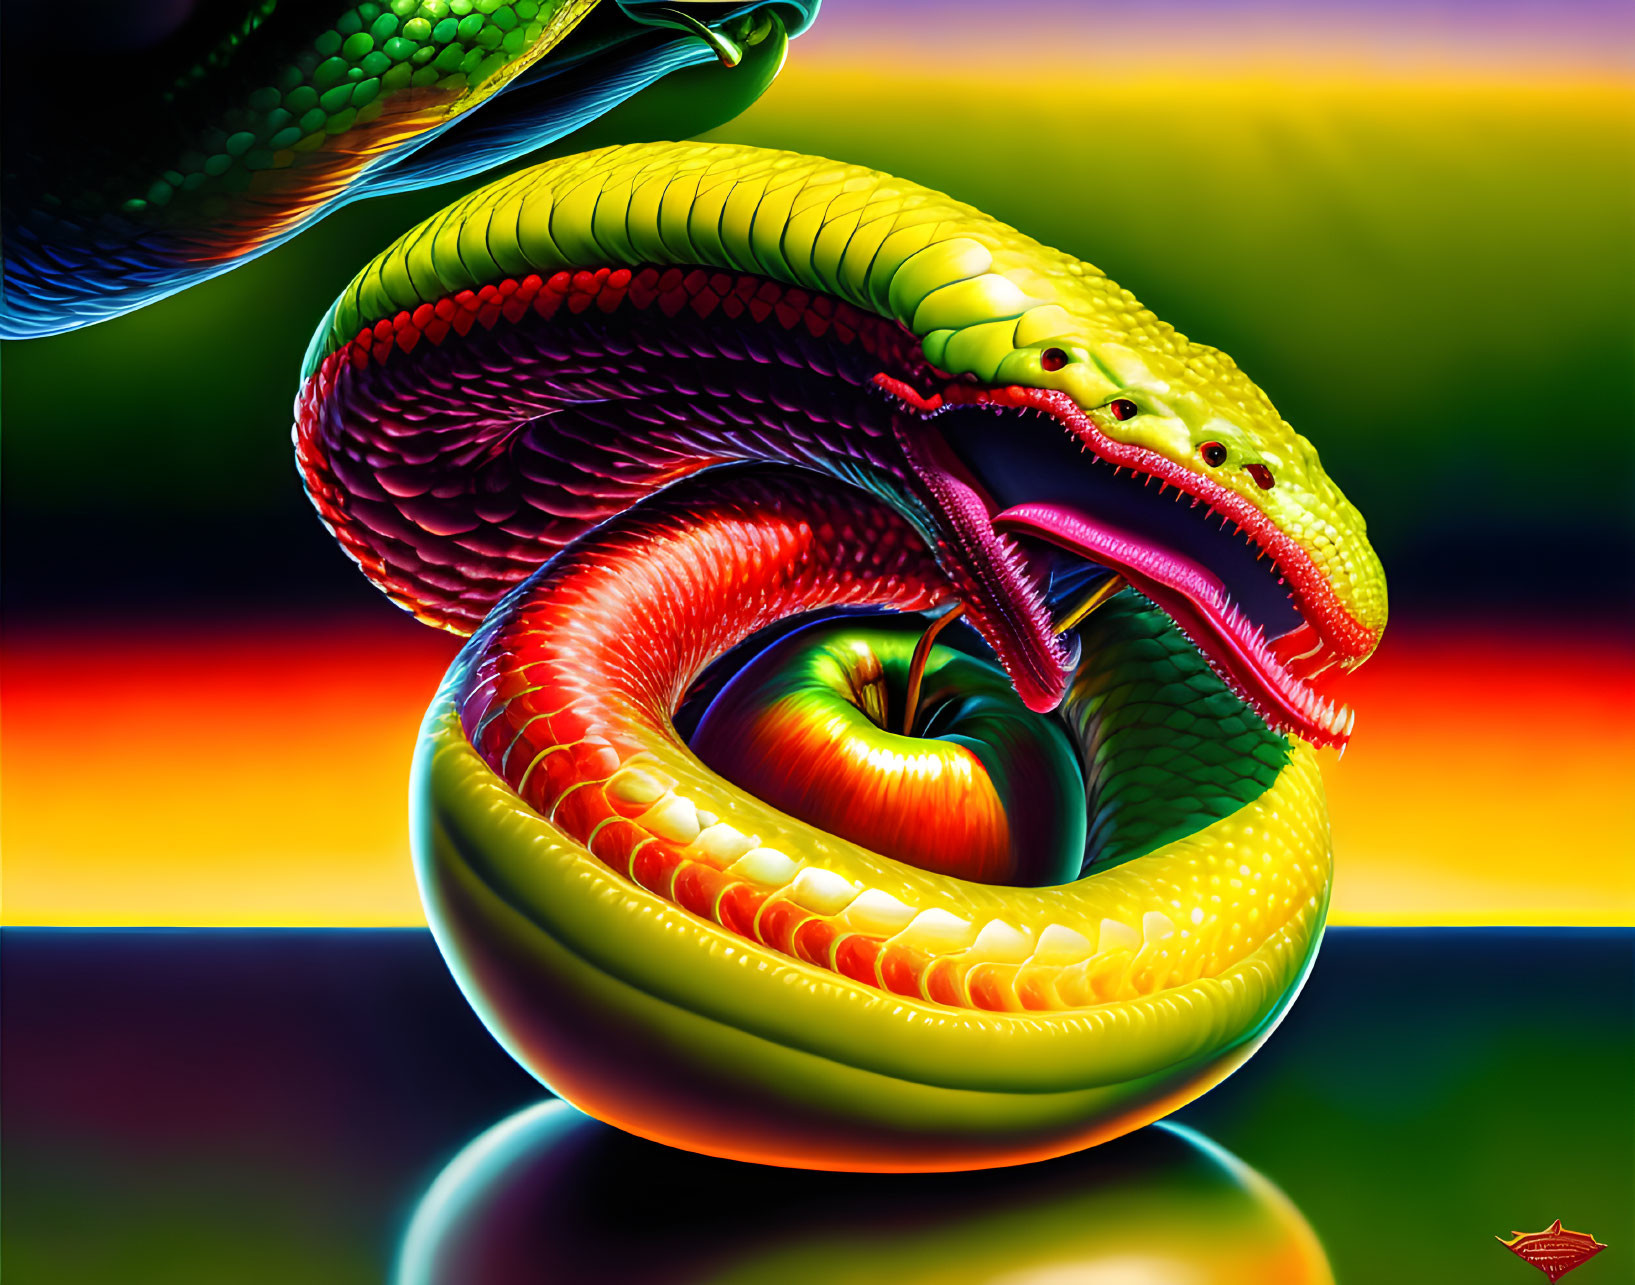 Colorful digital artwork: Serpent and apple with rainbow background